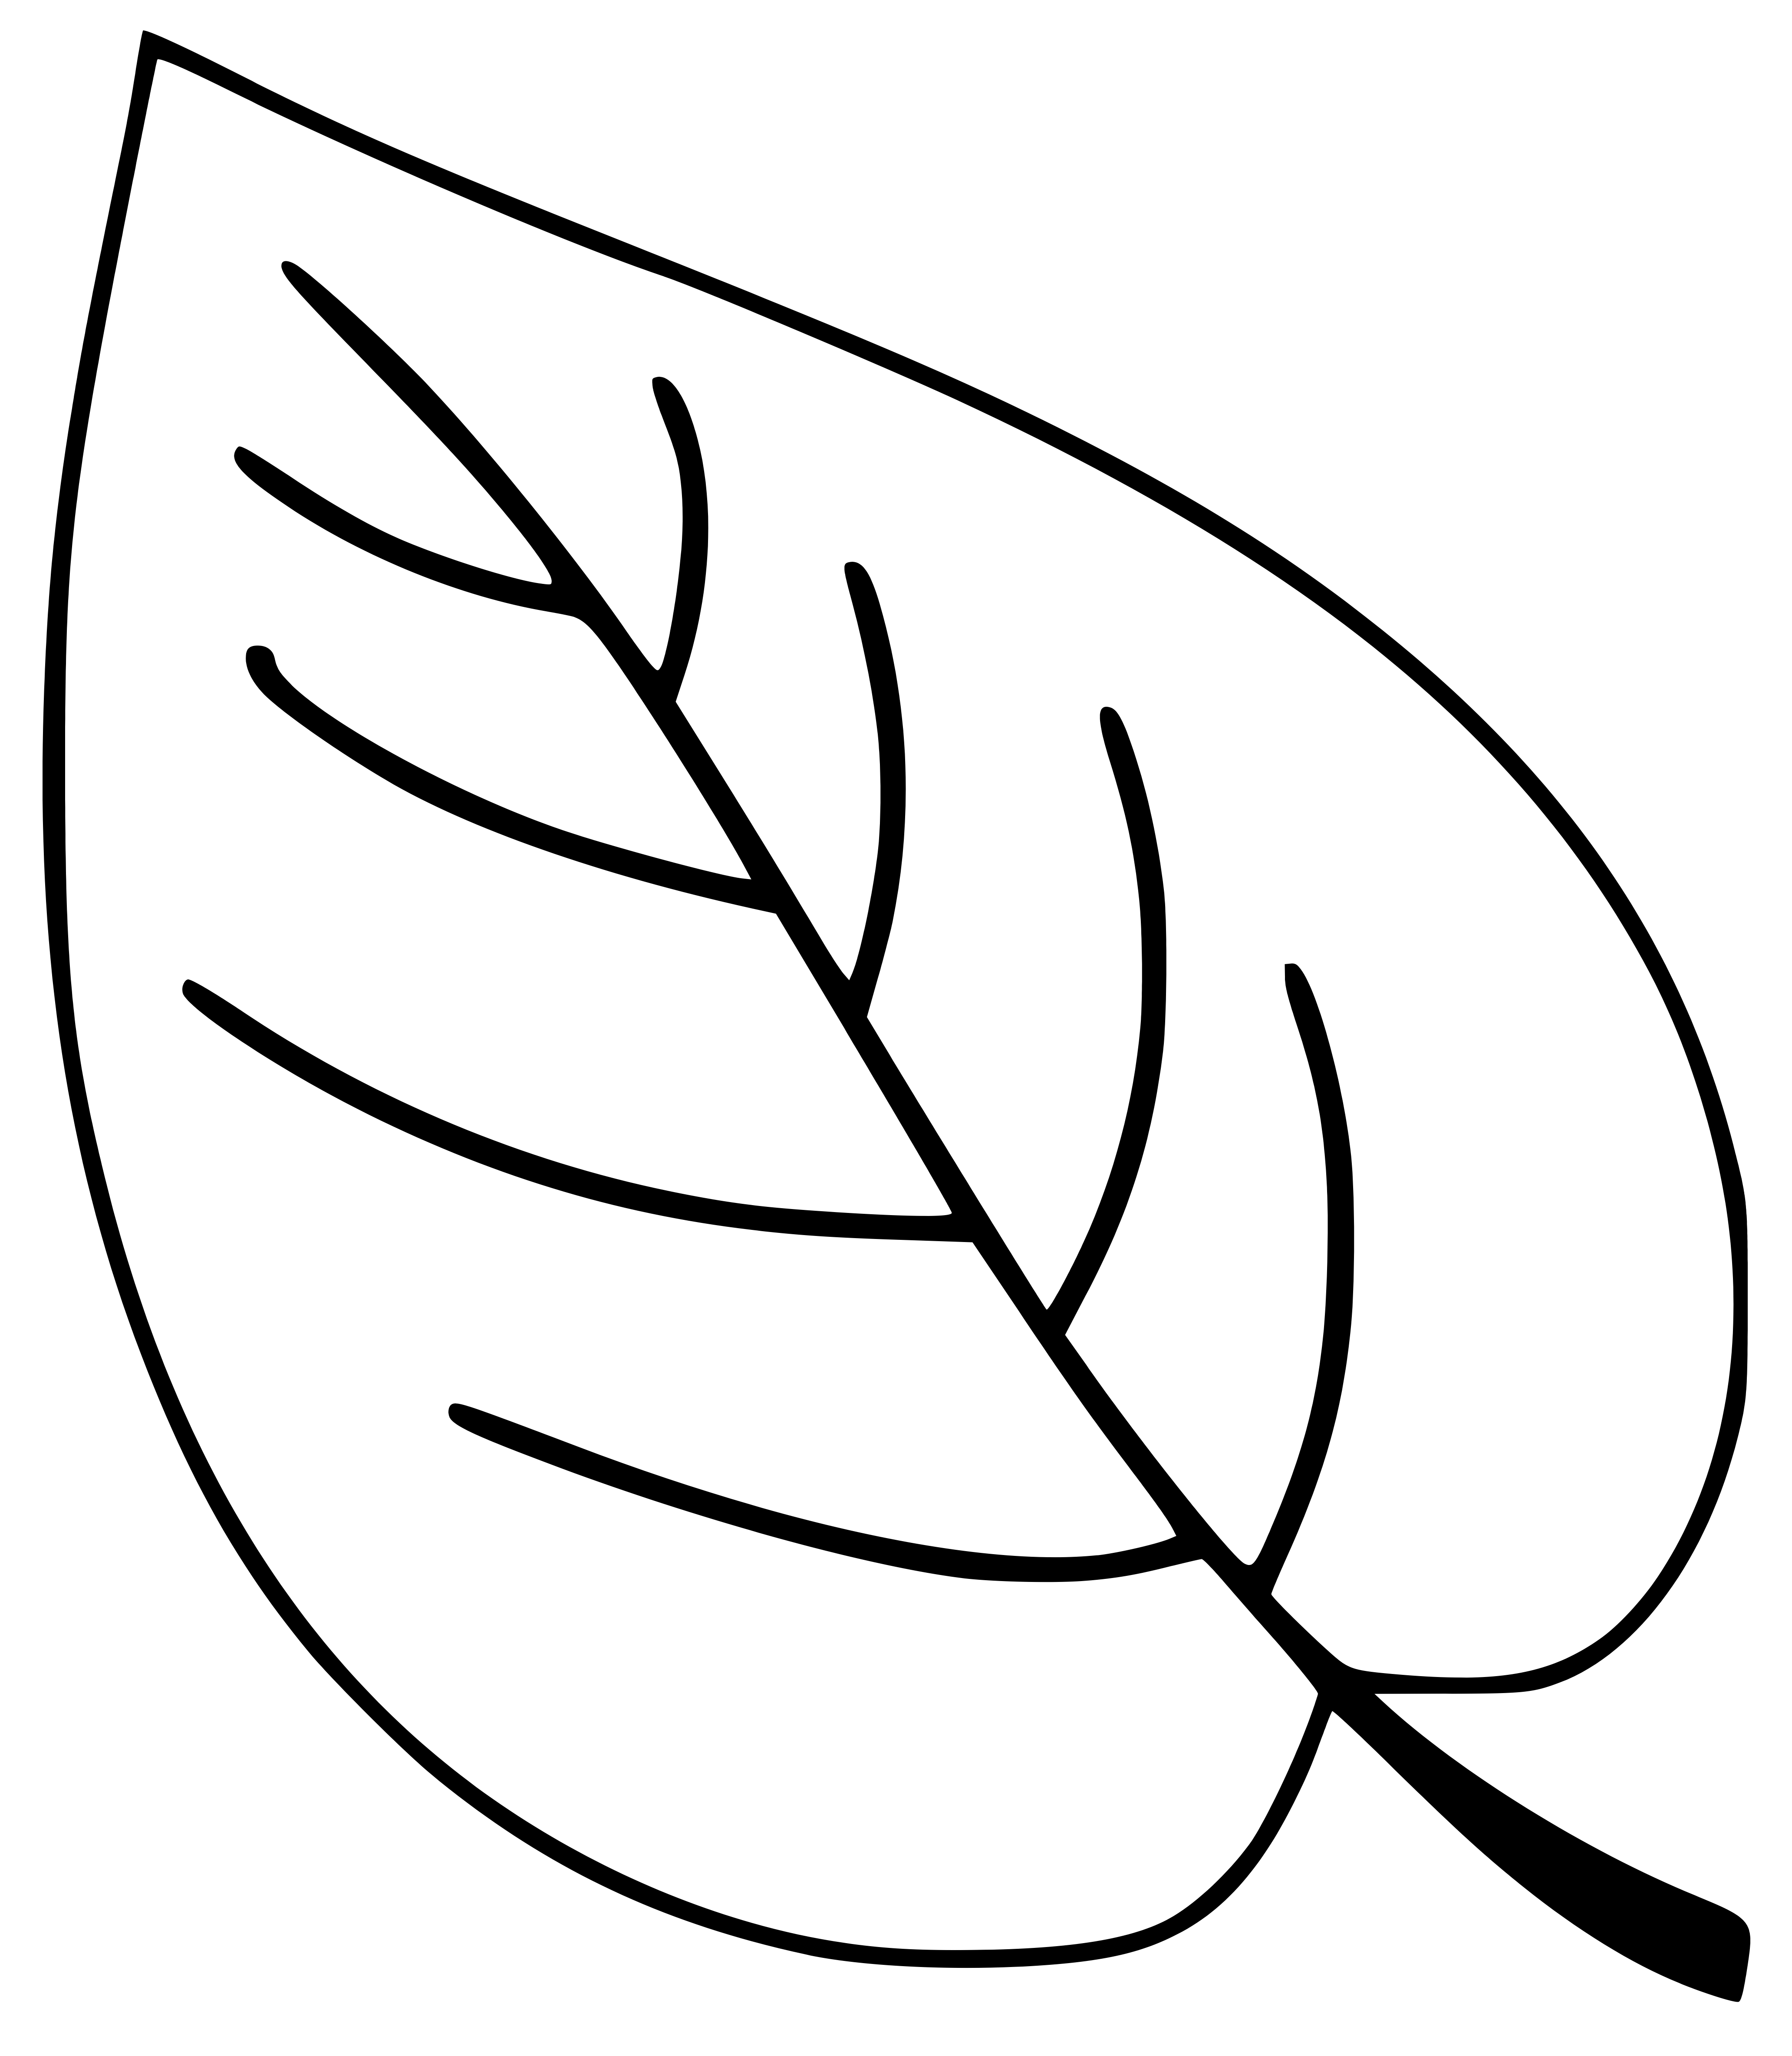 Printable Blank Leaf Picture Coloring Page for kids.